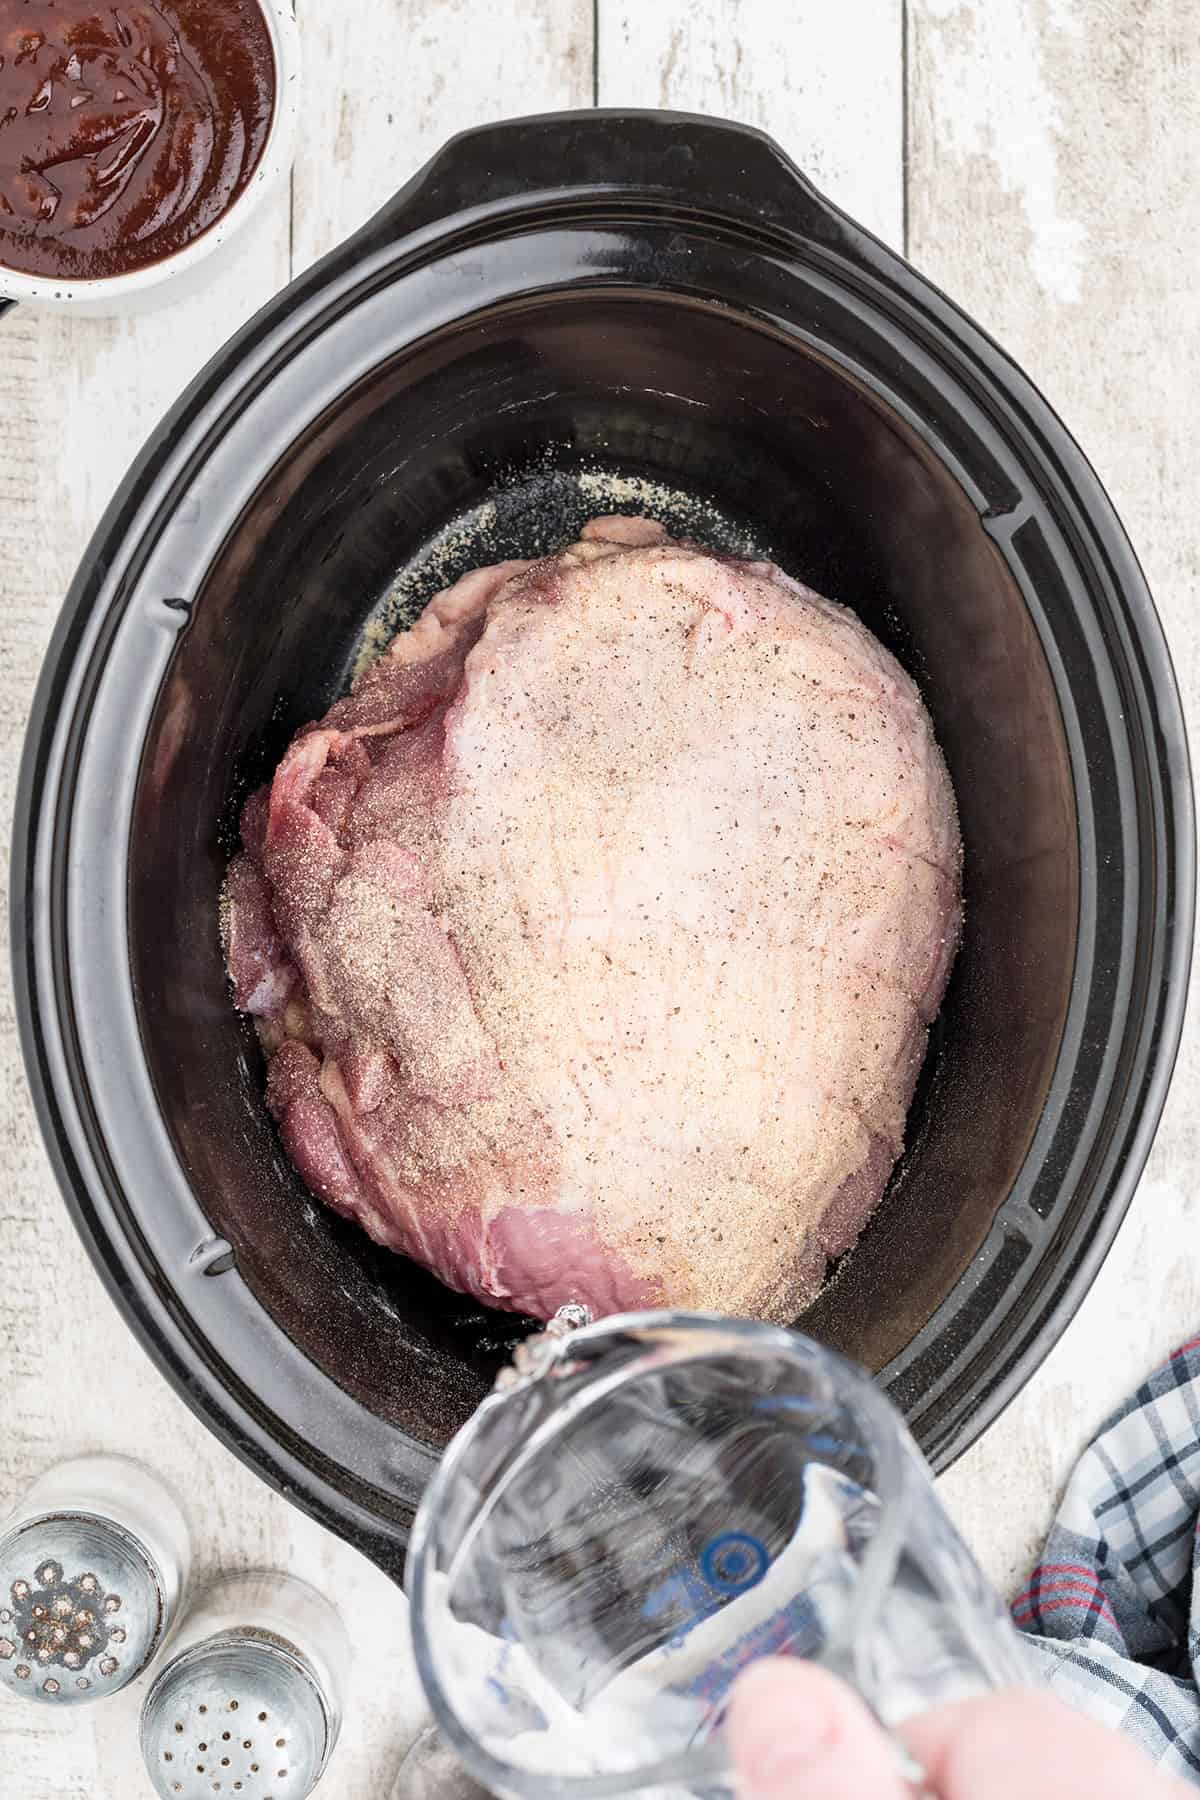 Pouring water into the slow cooker with the pork roast.